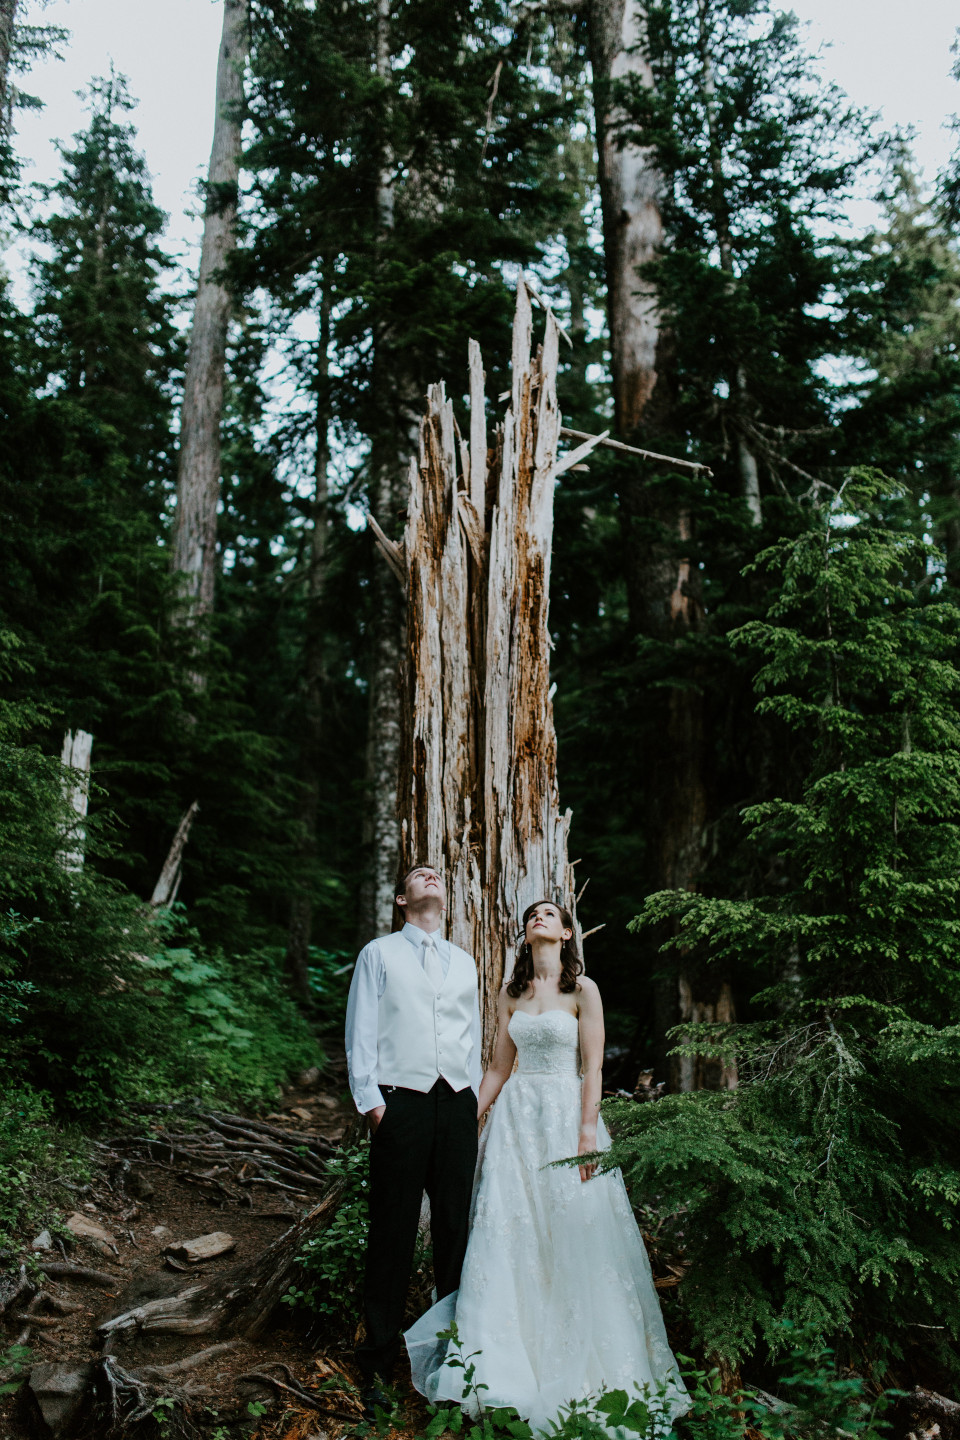 Moira and Ryan stand in front of a downed tree, looking up. Adventure elopement wedding shoot by Sienna Plus Josh.